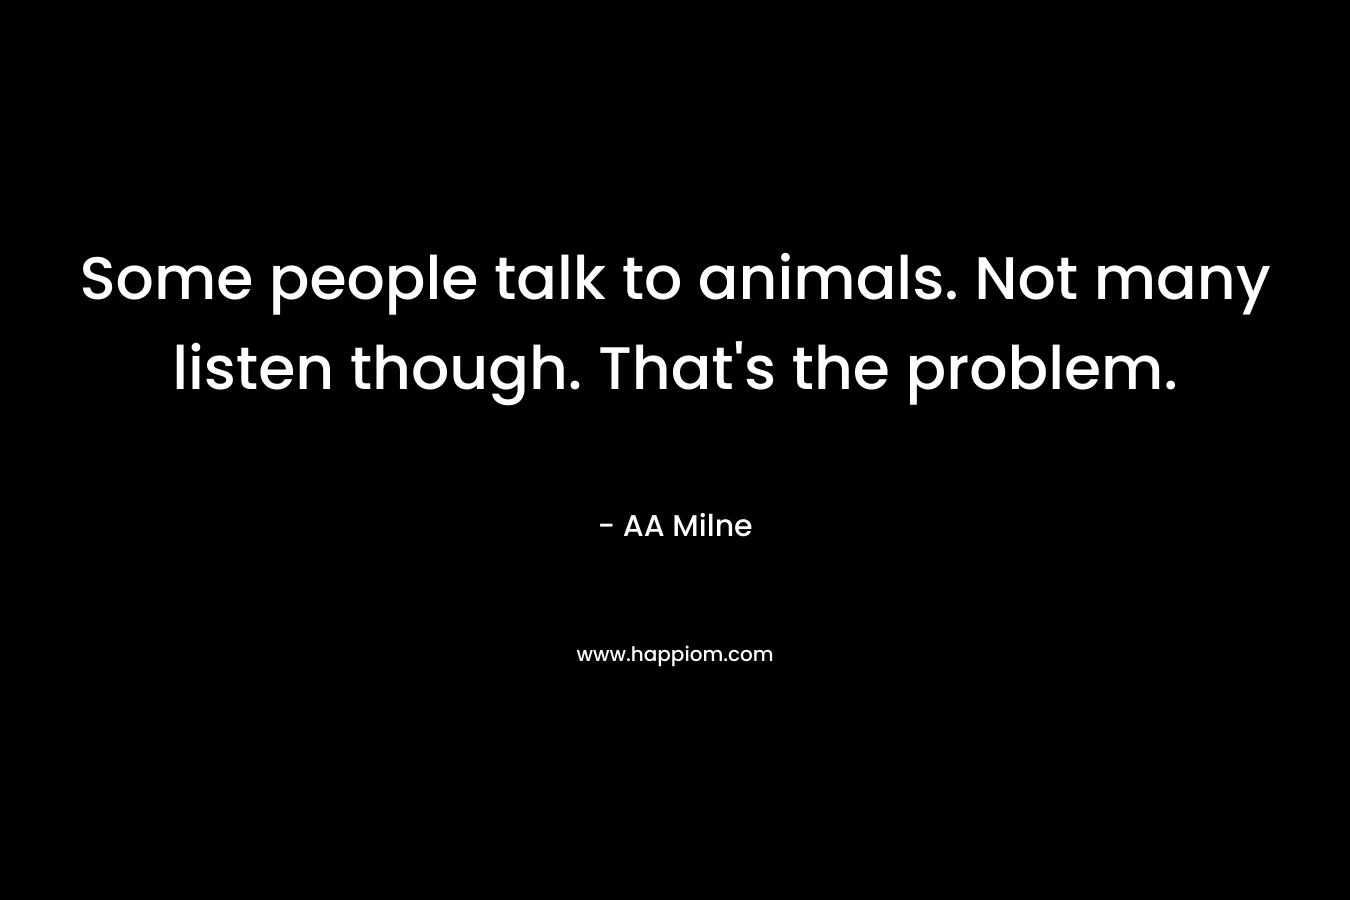 Some people talk to animals. Not many listen though. That’s the problem. – AA Milne